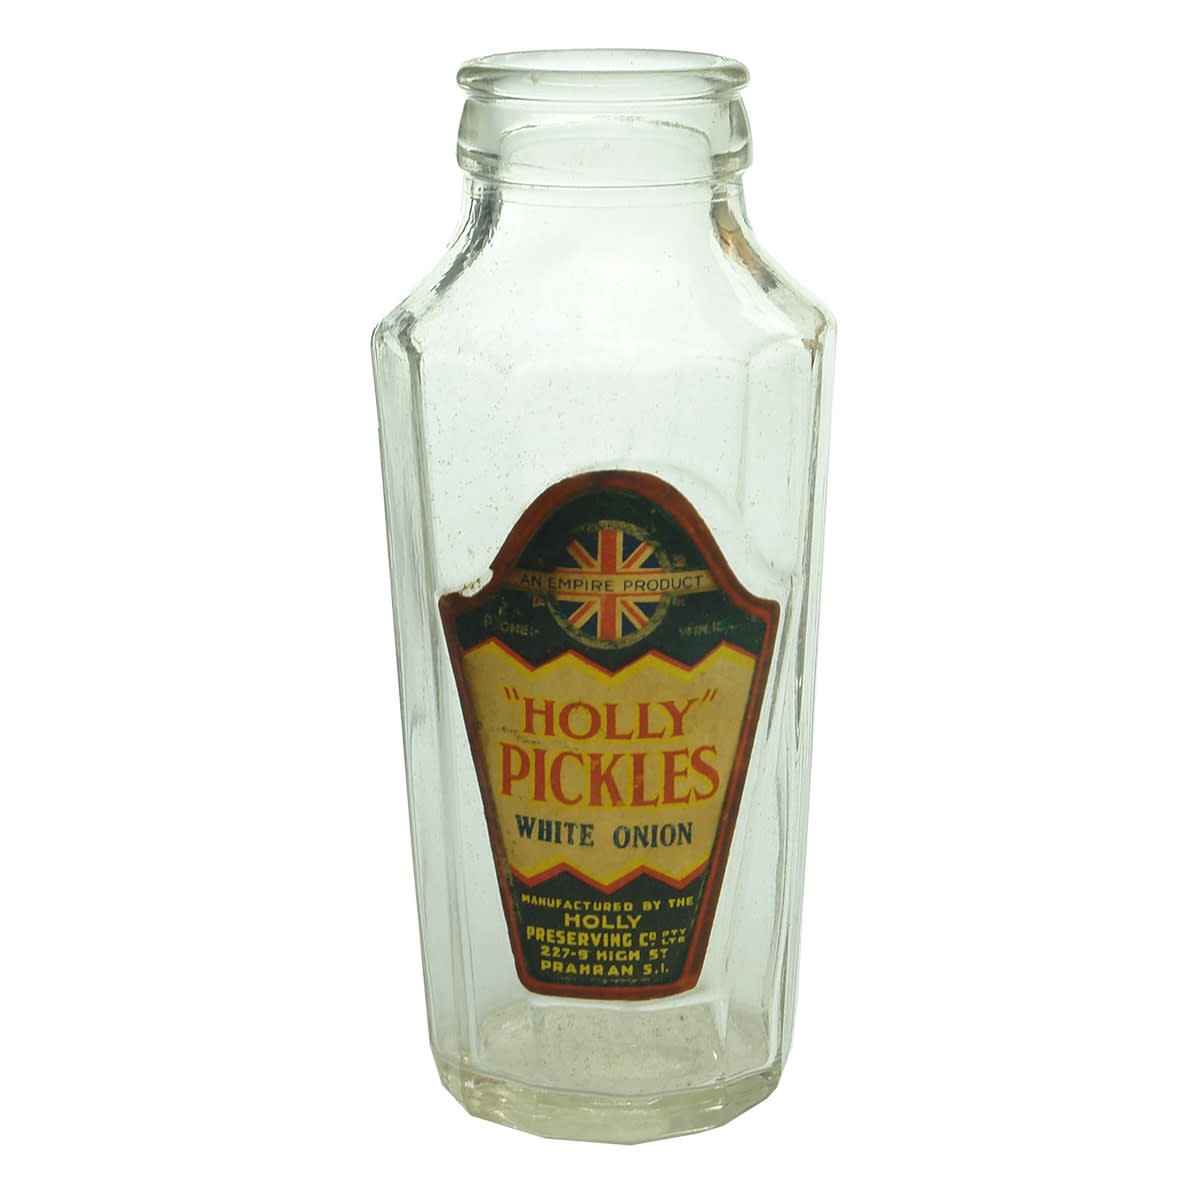 Pickle. Plain fancy jar with coloured label for Holly Pickles, Holly Preserving Co., Prahran. (Victoria)